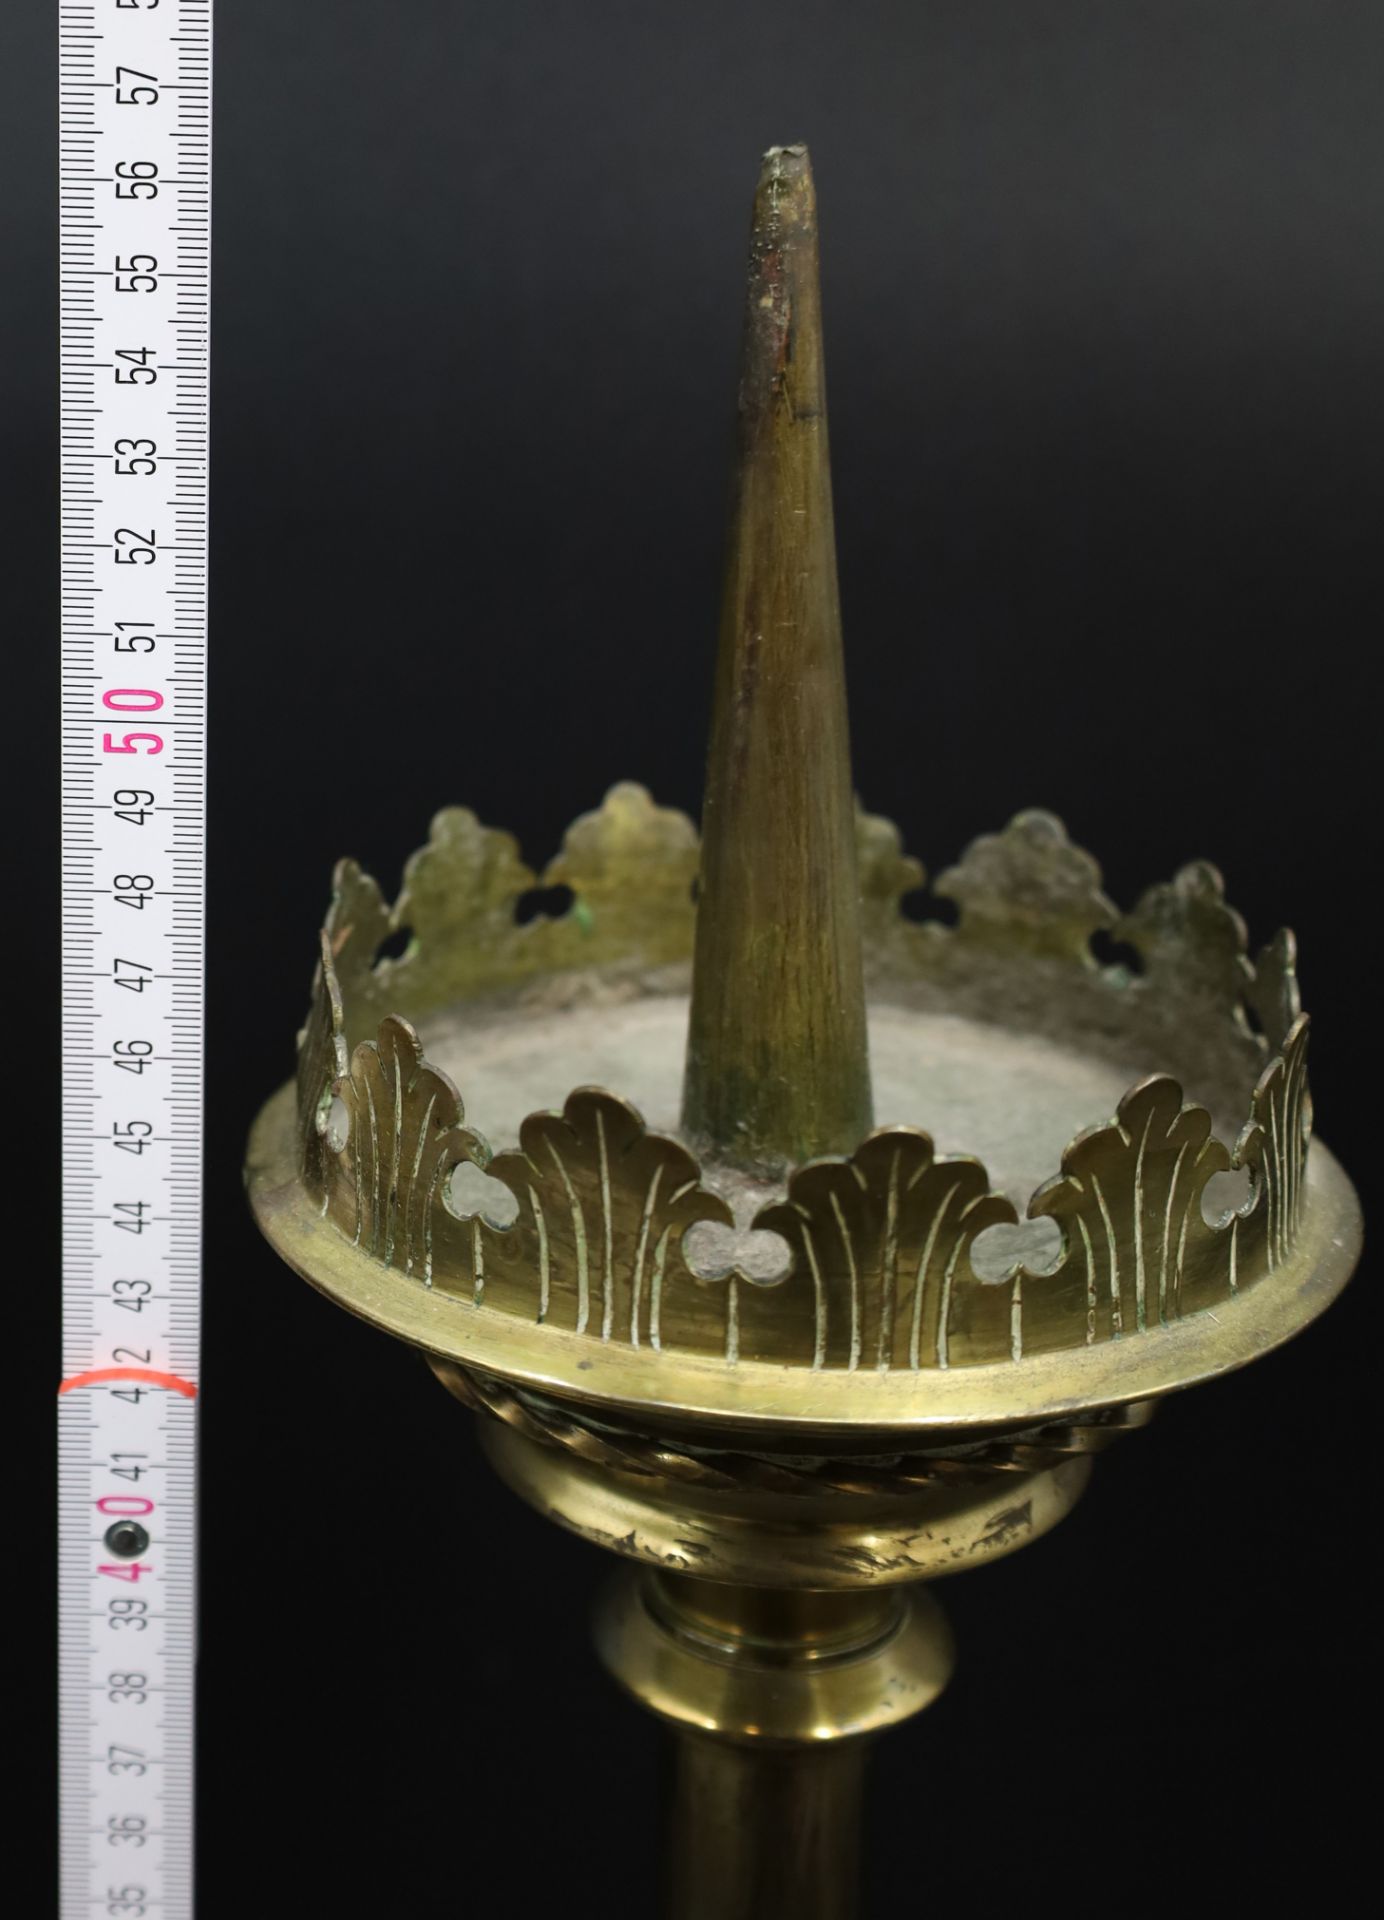 Two altar candlesticks. Brass. Around 1900. - Image 12 of 14